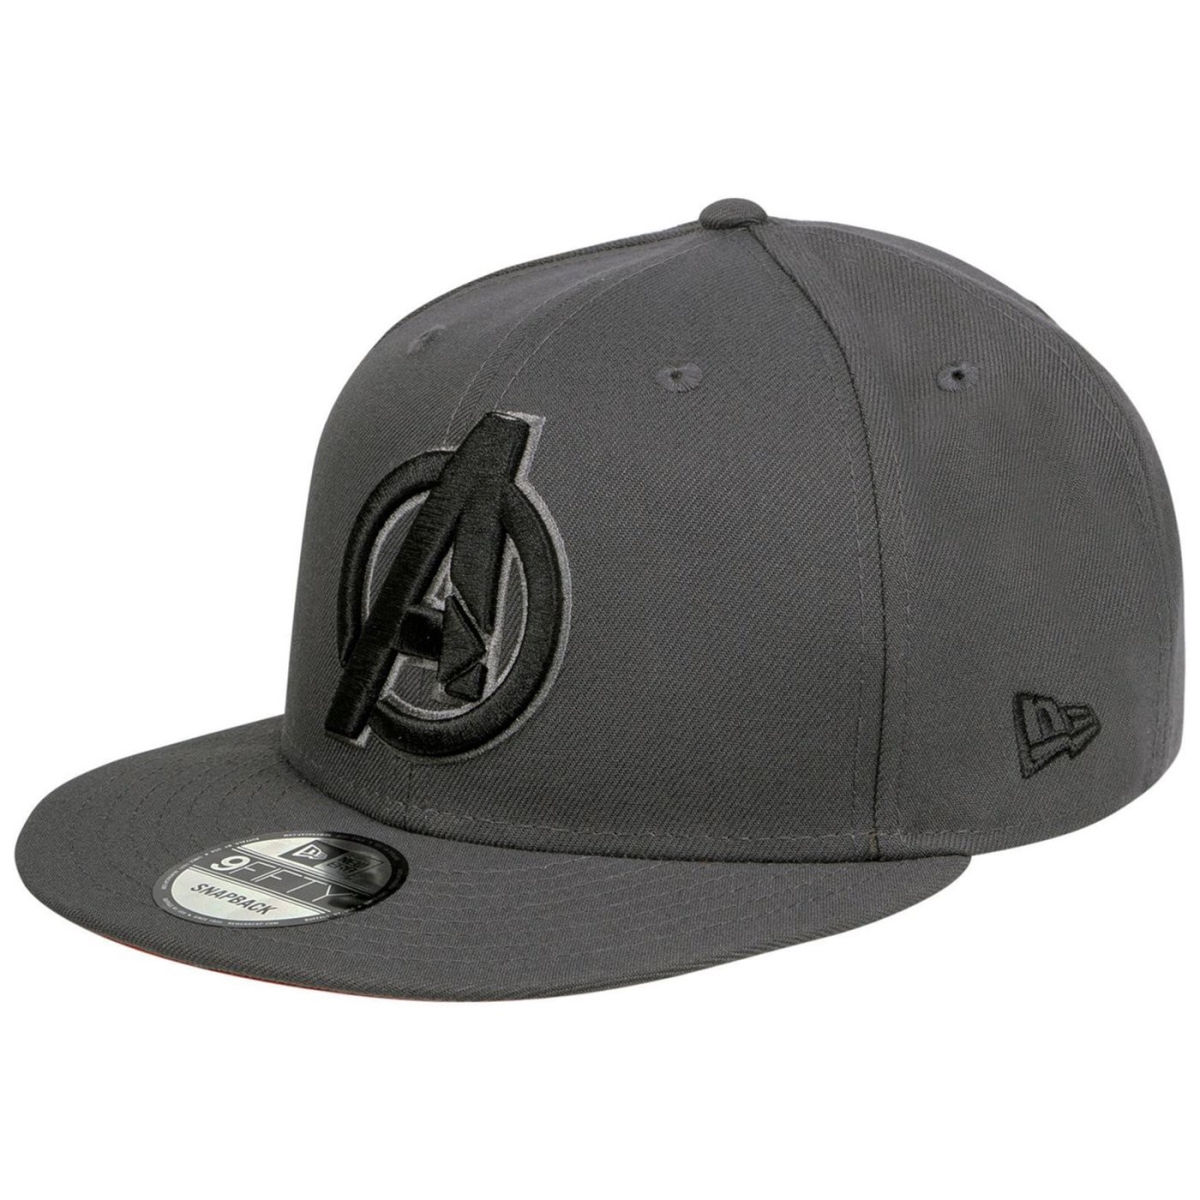 Picture of Avengers Endgame 110991 Avengers Endgame Movie a 9Fifty Adjustable Hat